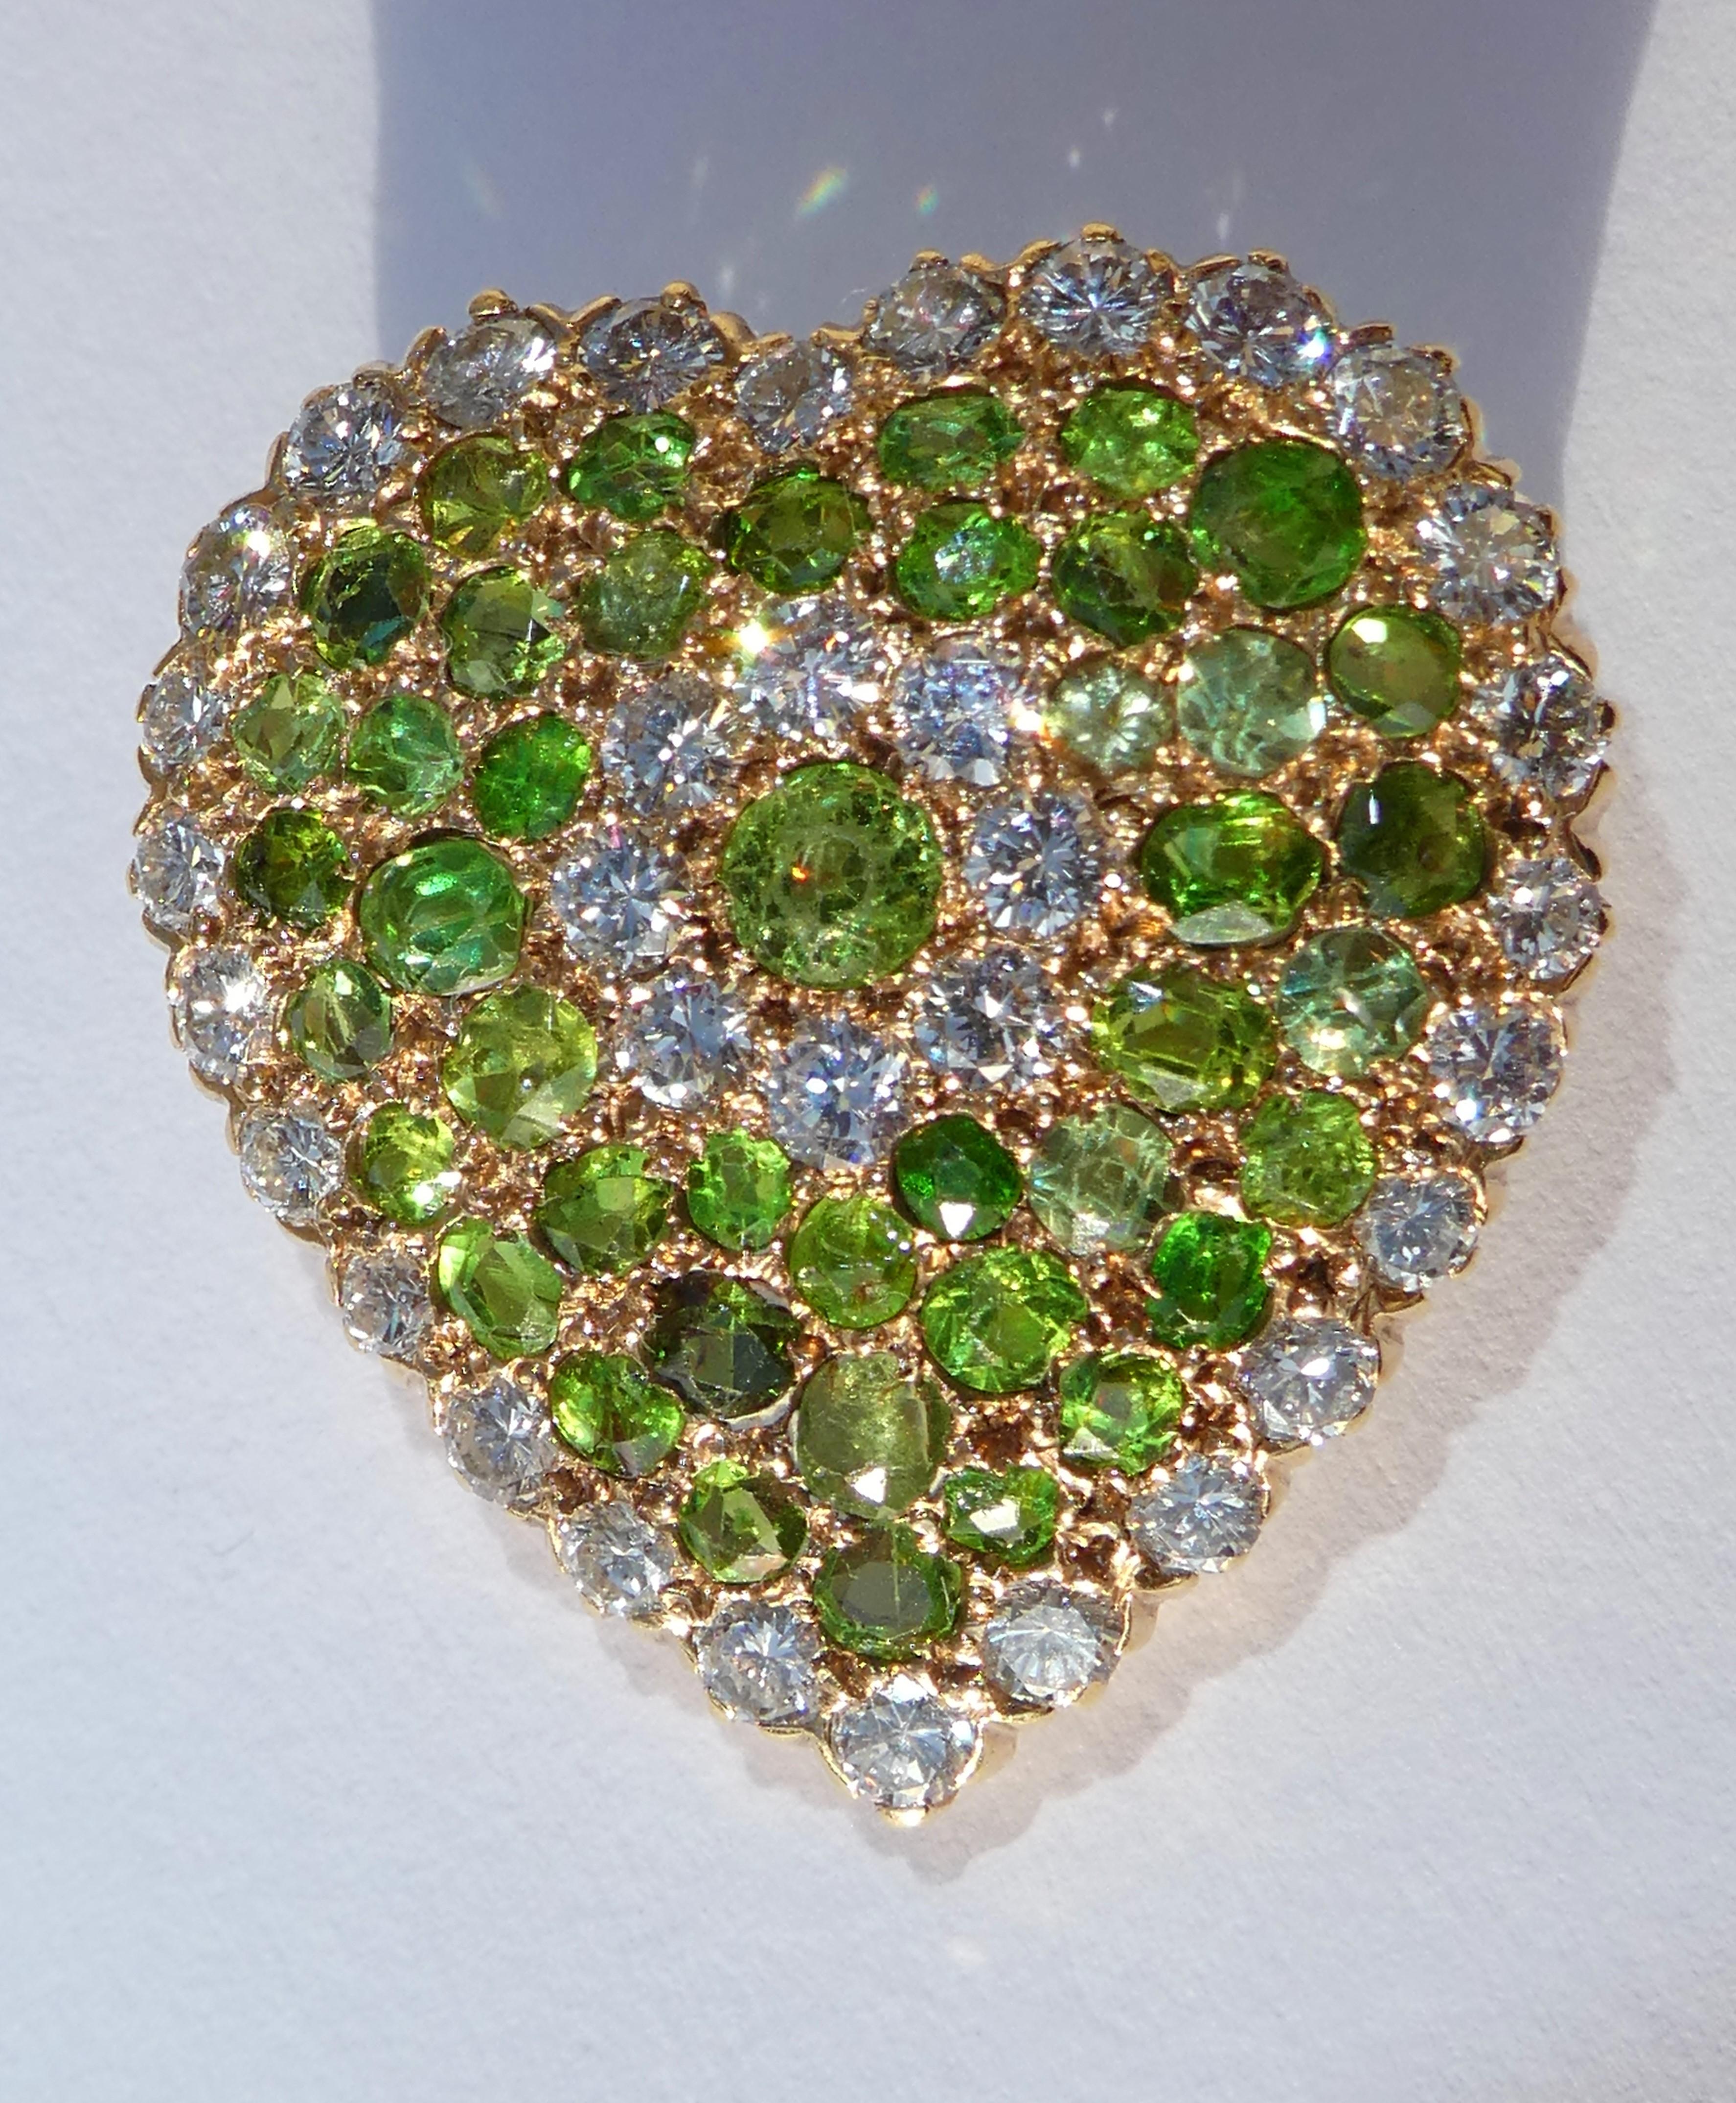 This green heart was crafted circa 1915 in the United States in 14 karat gold. It is so special because it is pavé set with 46 rare green demantoid garnets in different sizes of ca. 4,2 carat and 34 round Brilliant cut diamands of high colour and